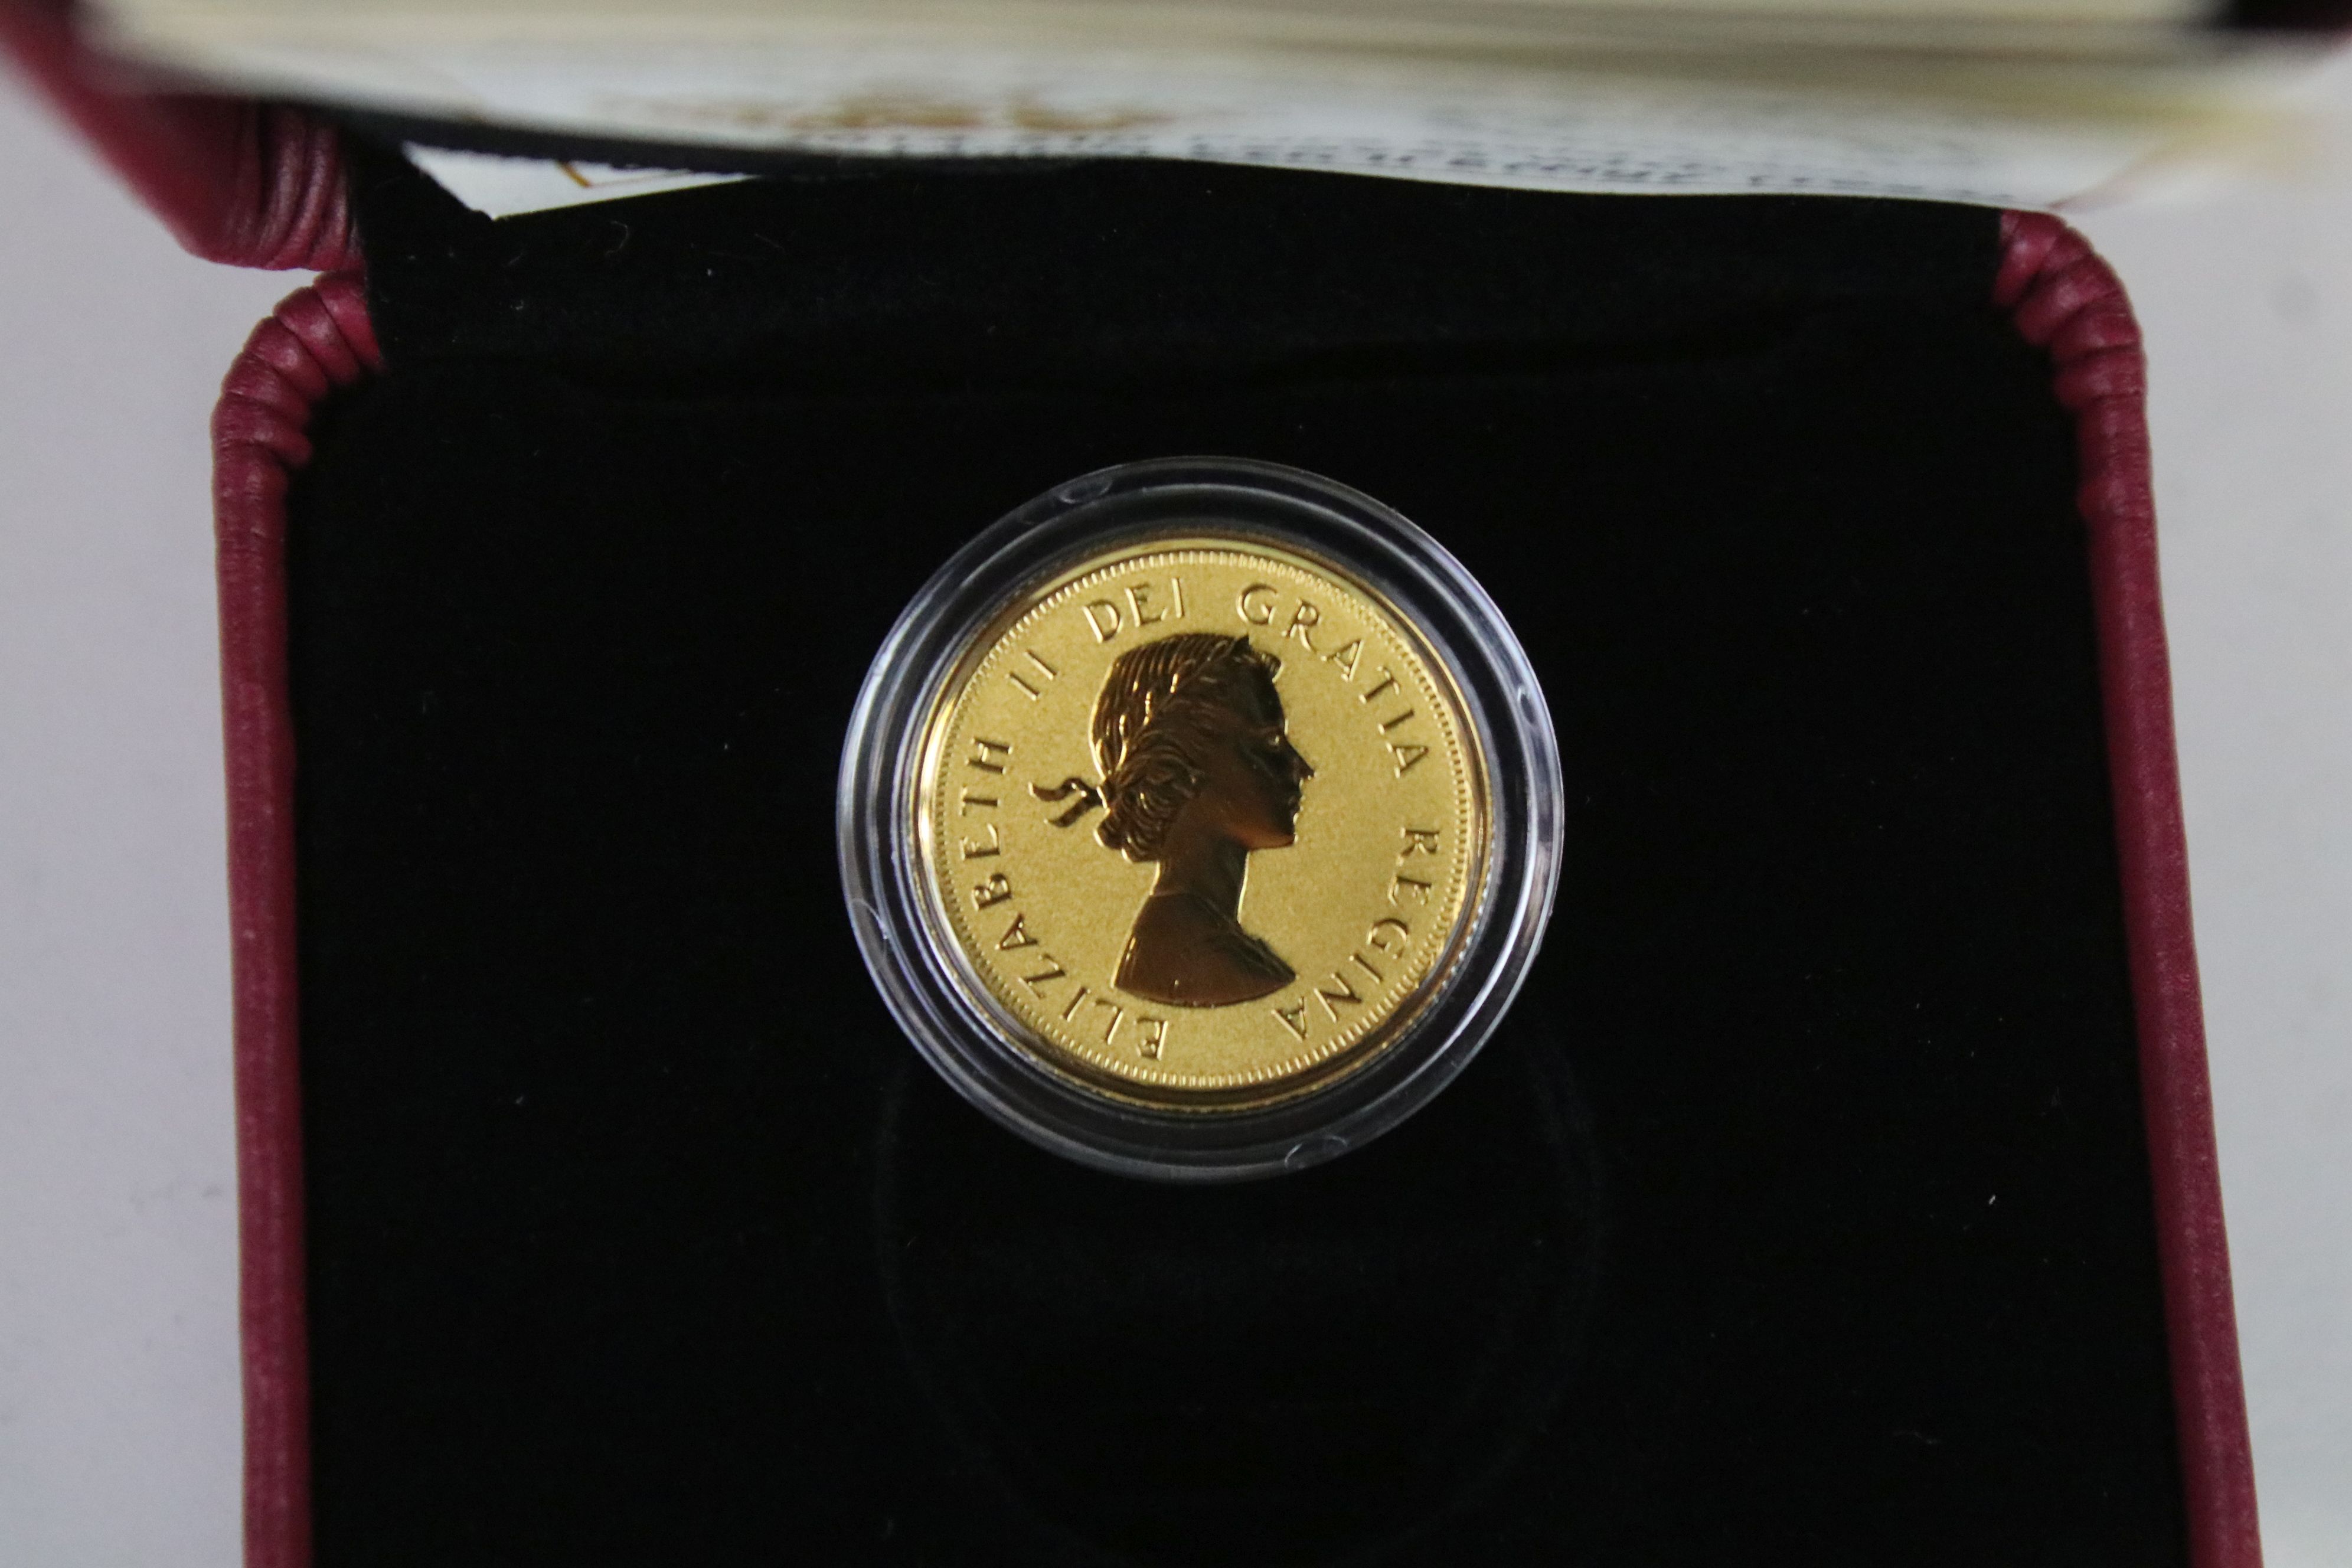 A Canada 24ct gold proof 2014 Gillick Effigy maple leaf coin, encapsulated within fitted display - Image 4 of 5